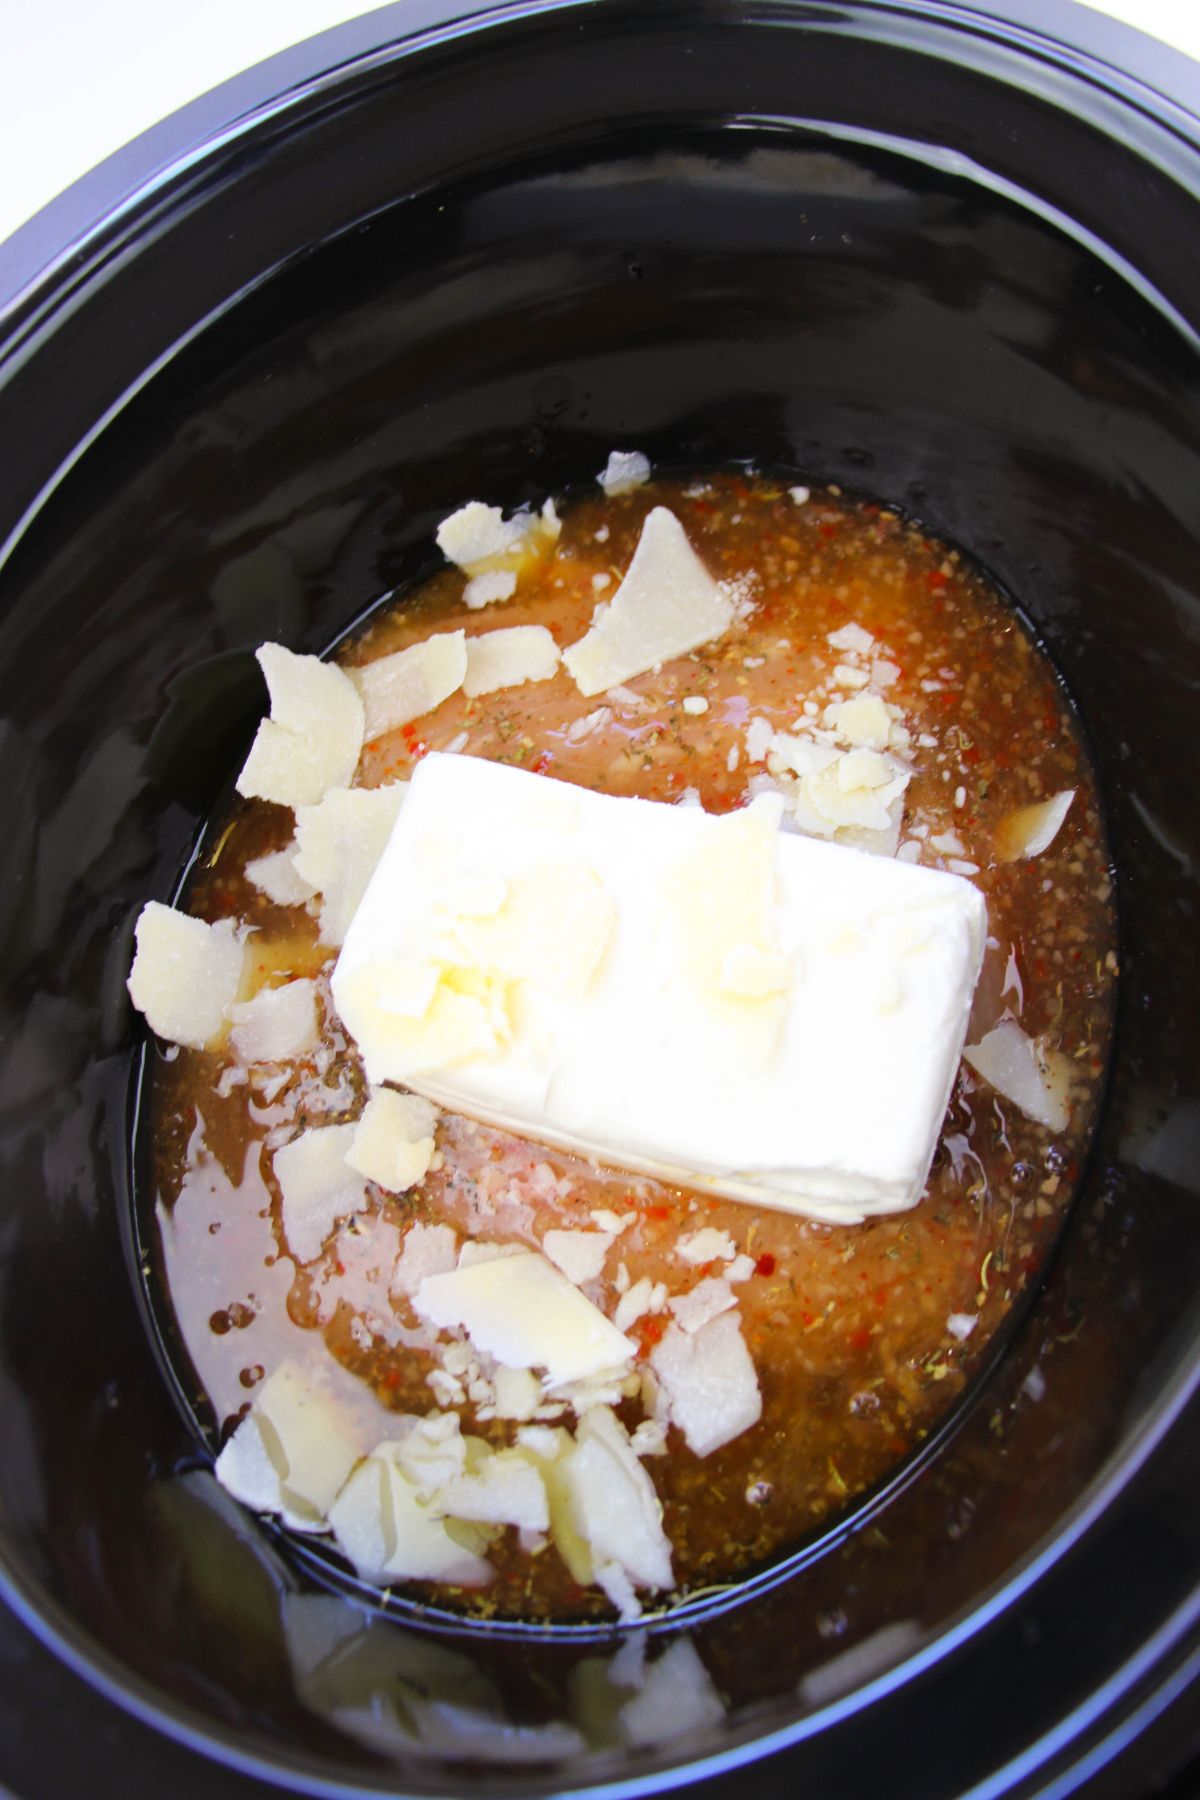 Italian dressing and cream cheese on top of the chicken breasts in the crock pot.